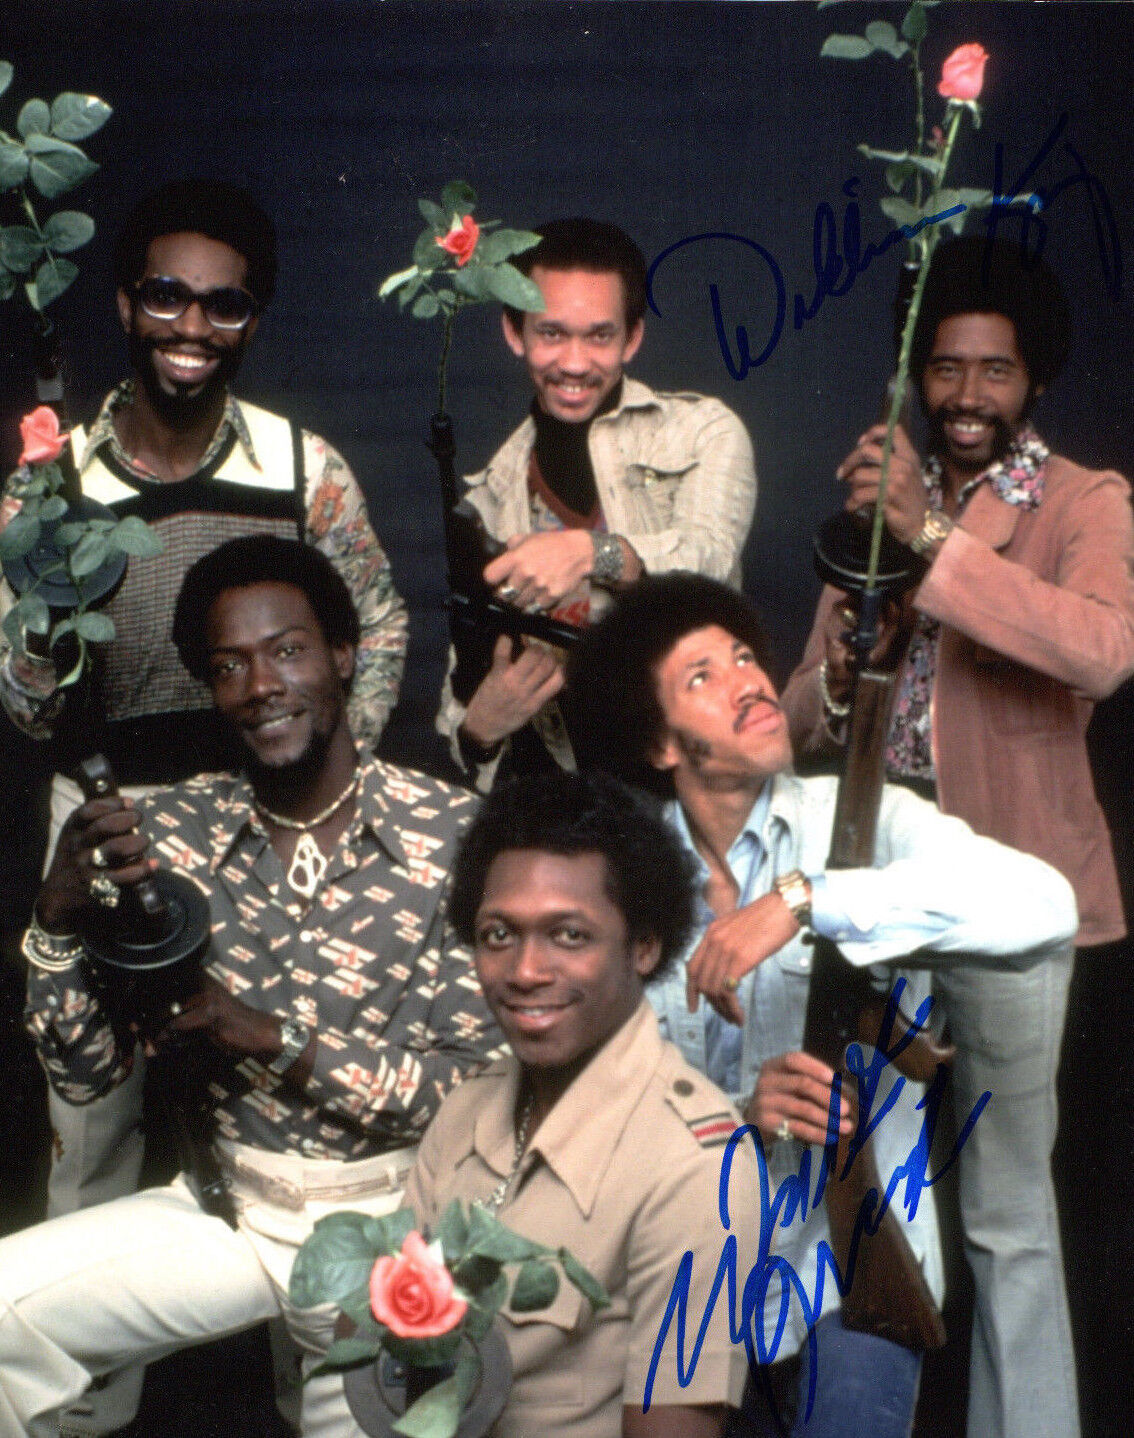 GFA William King Walter Orange * THE COMMODORES * Signed 8x10 Photo Poster painting PROOF 1 COA